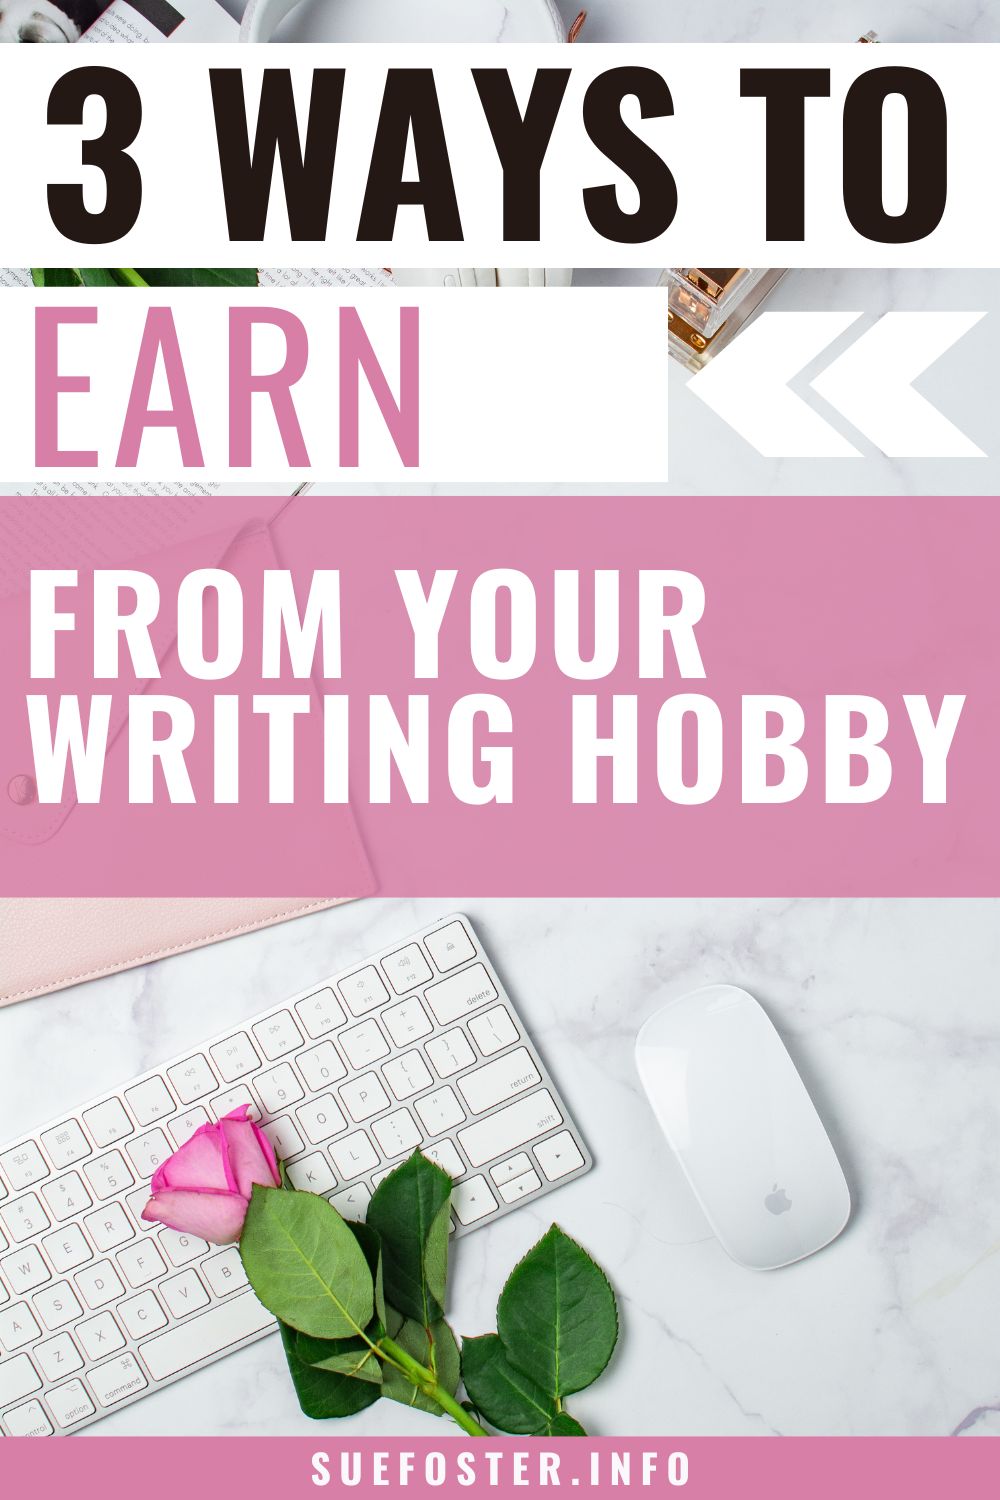 Writing is a profitable skill that many businesses seek in this modern world. Learn some ways to make money from this simple hobby.